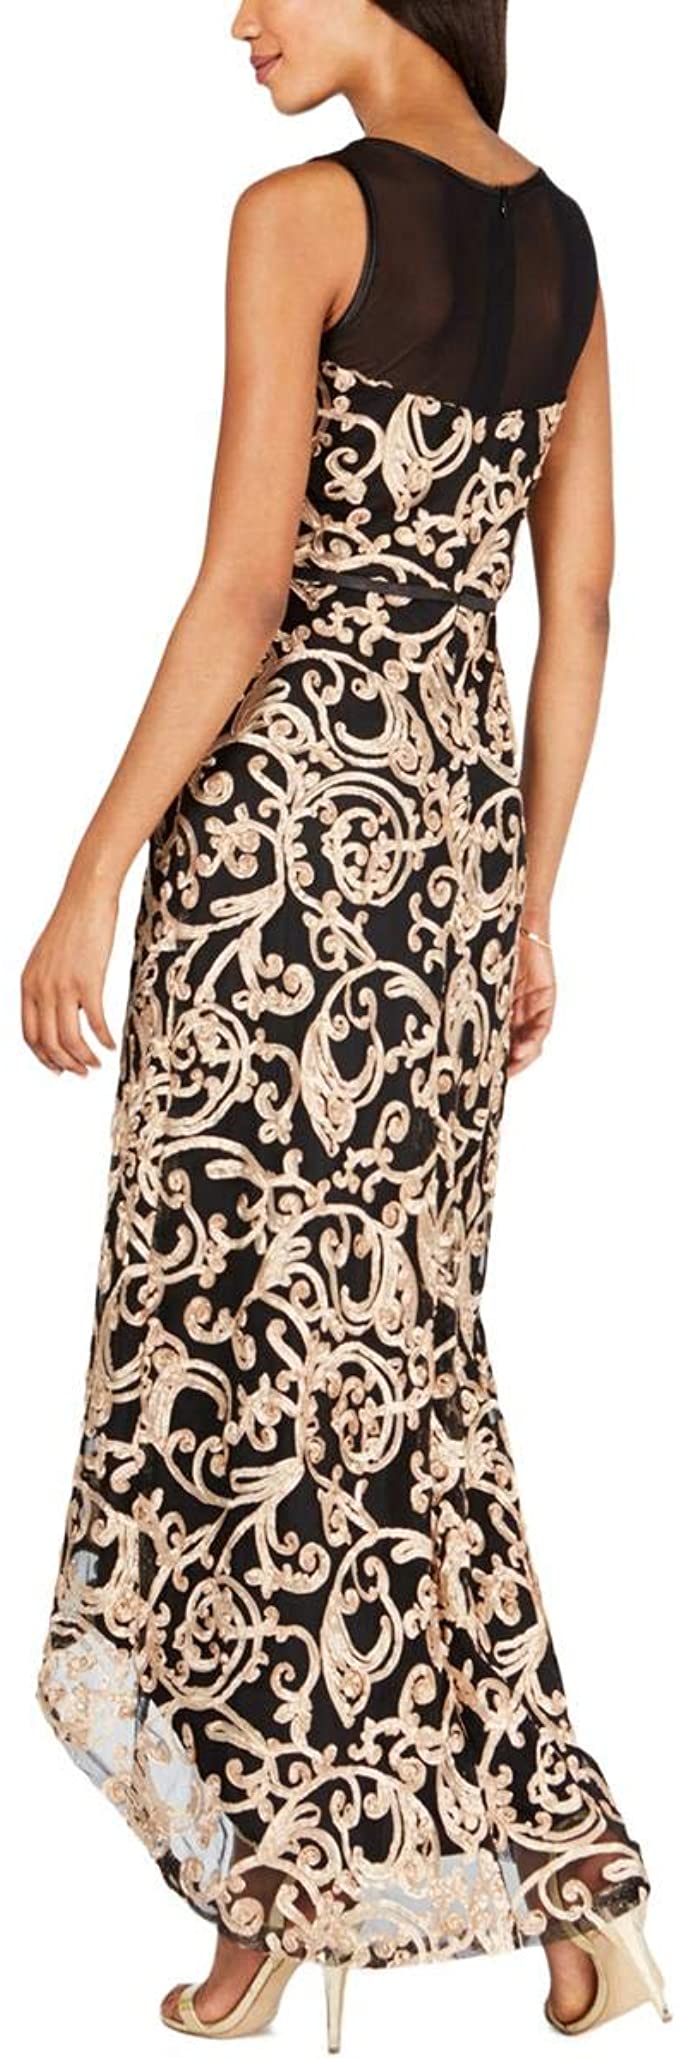 Connected Apparel Womens High Low Soutache Gown